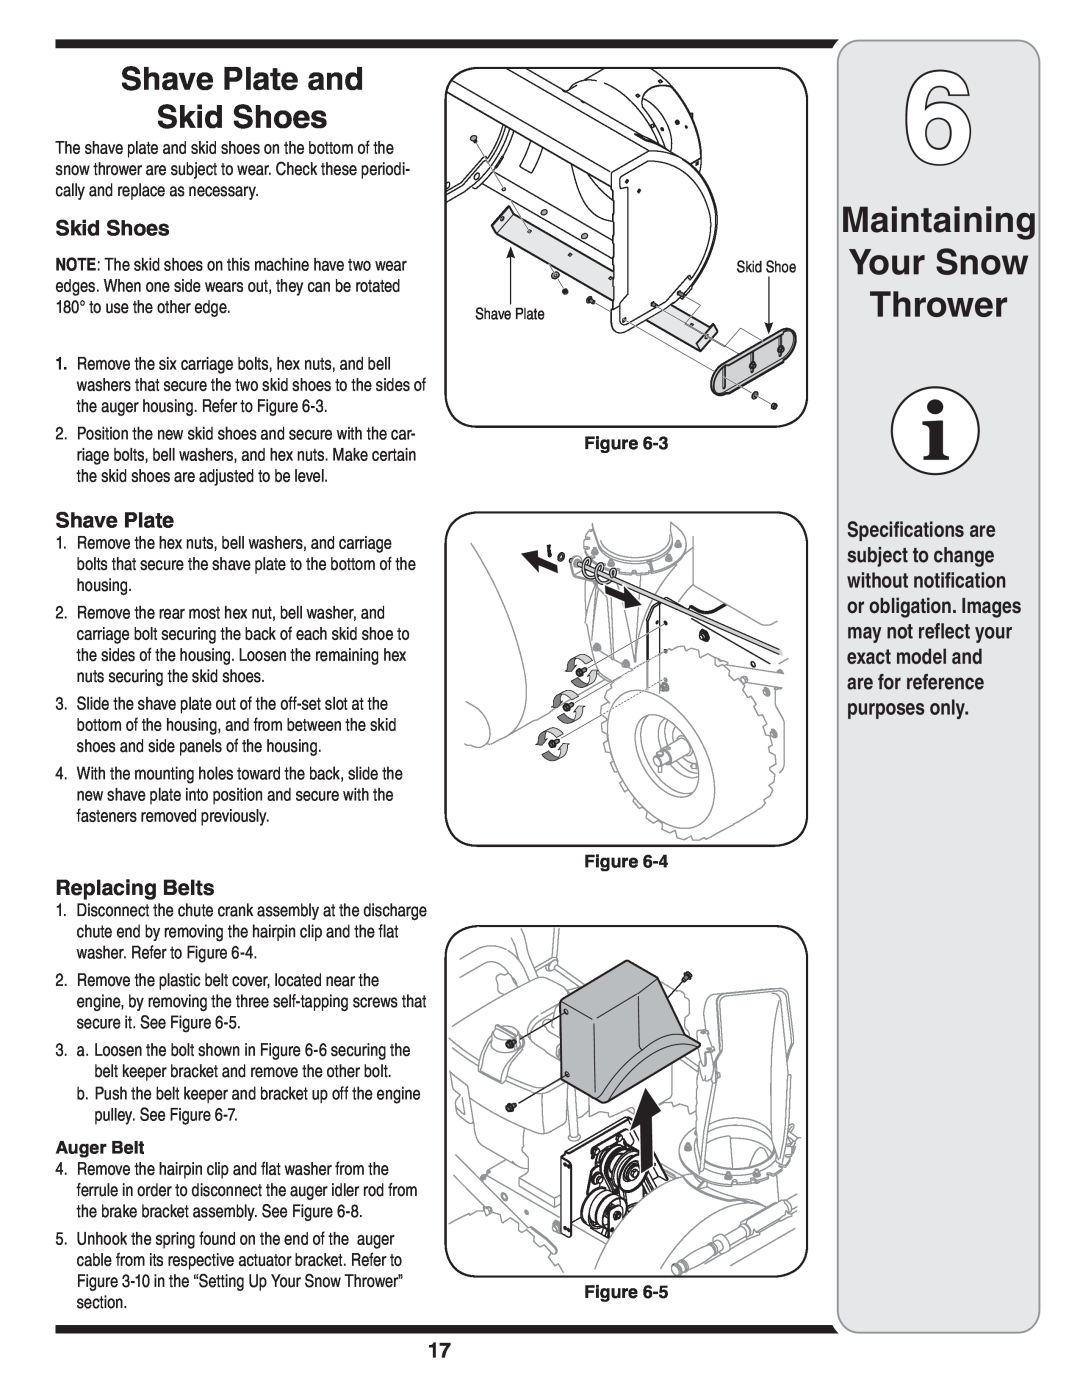 Cub Cadet 933 SWE Maintaining, Thrower, Your Snow, Shave Plate and Skid Shoes, Replacing Belts, Auger Belt, Figure Figure 